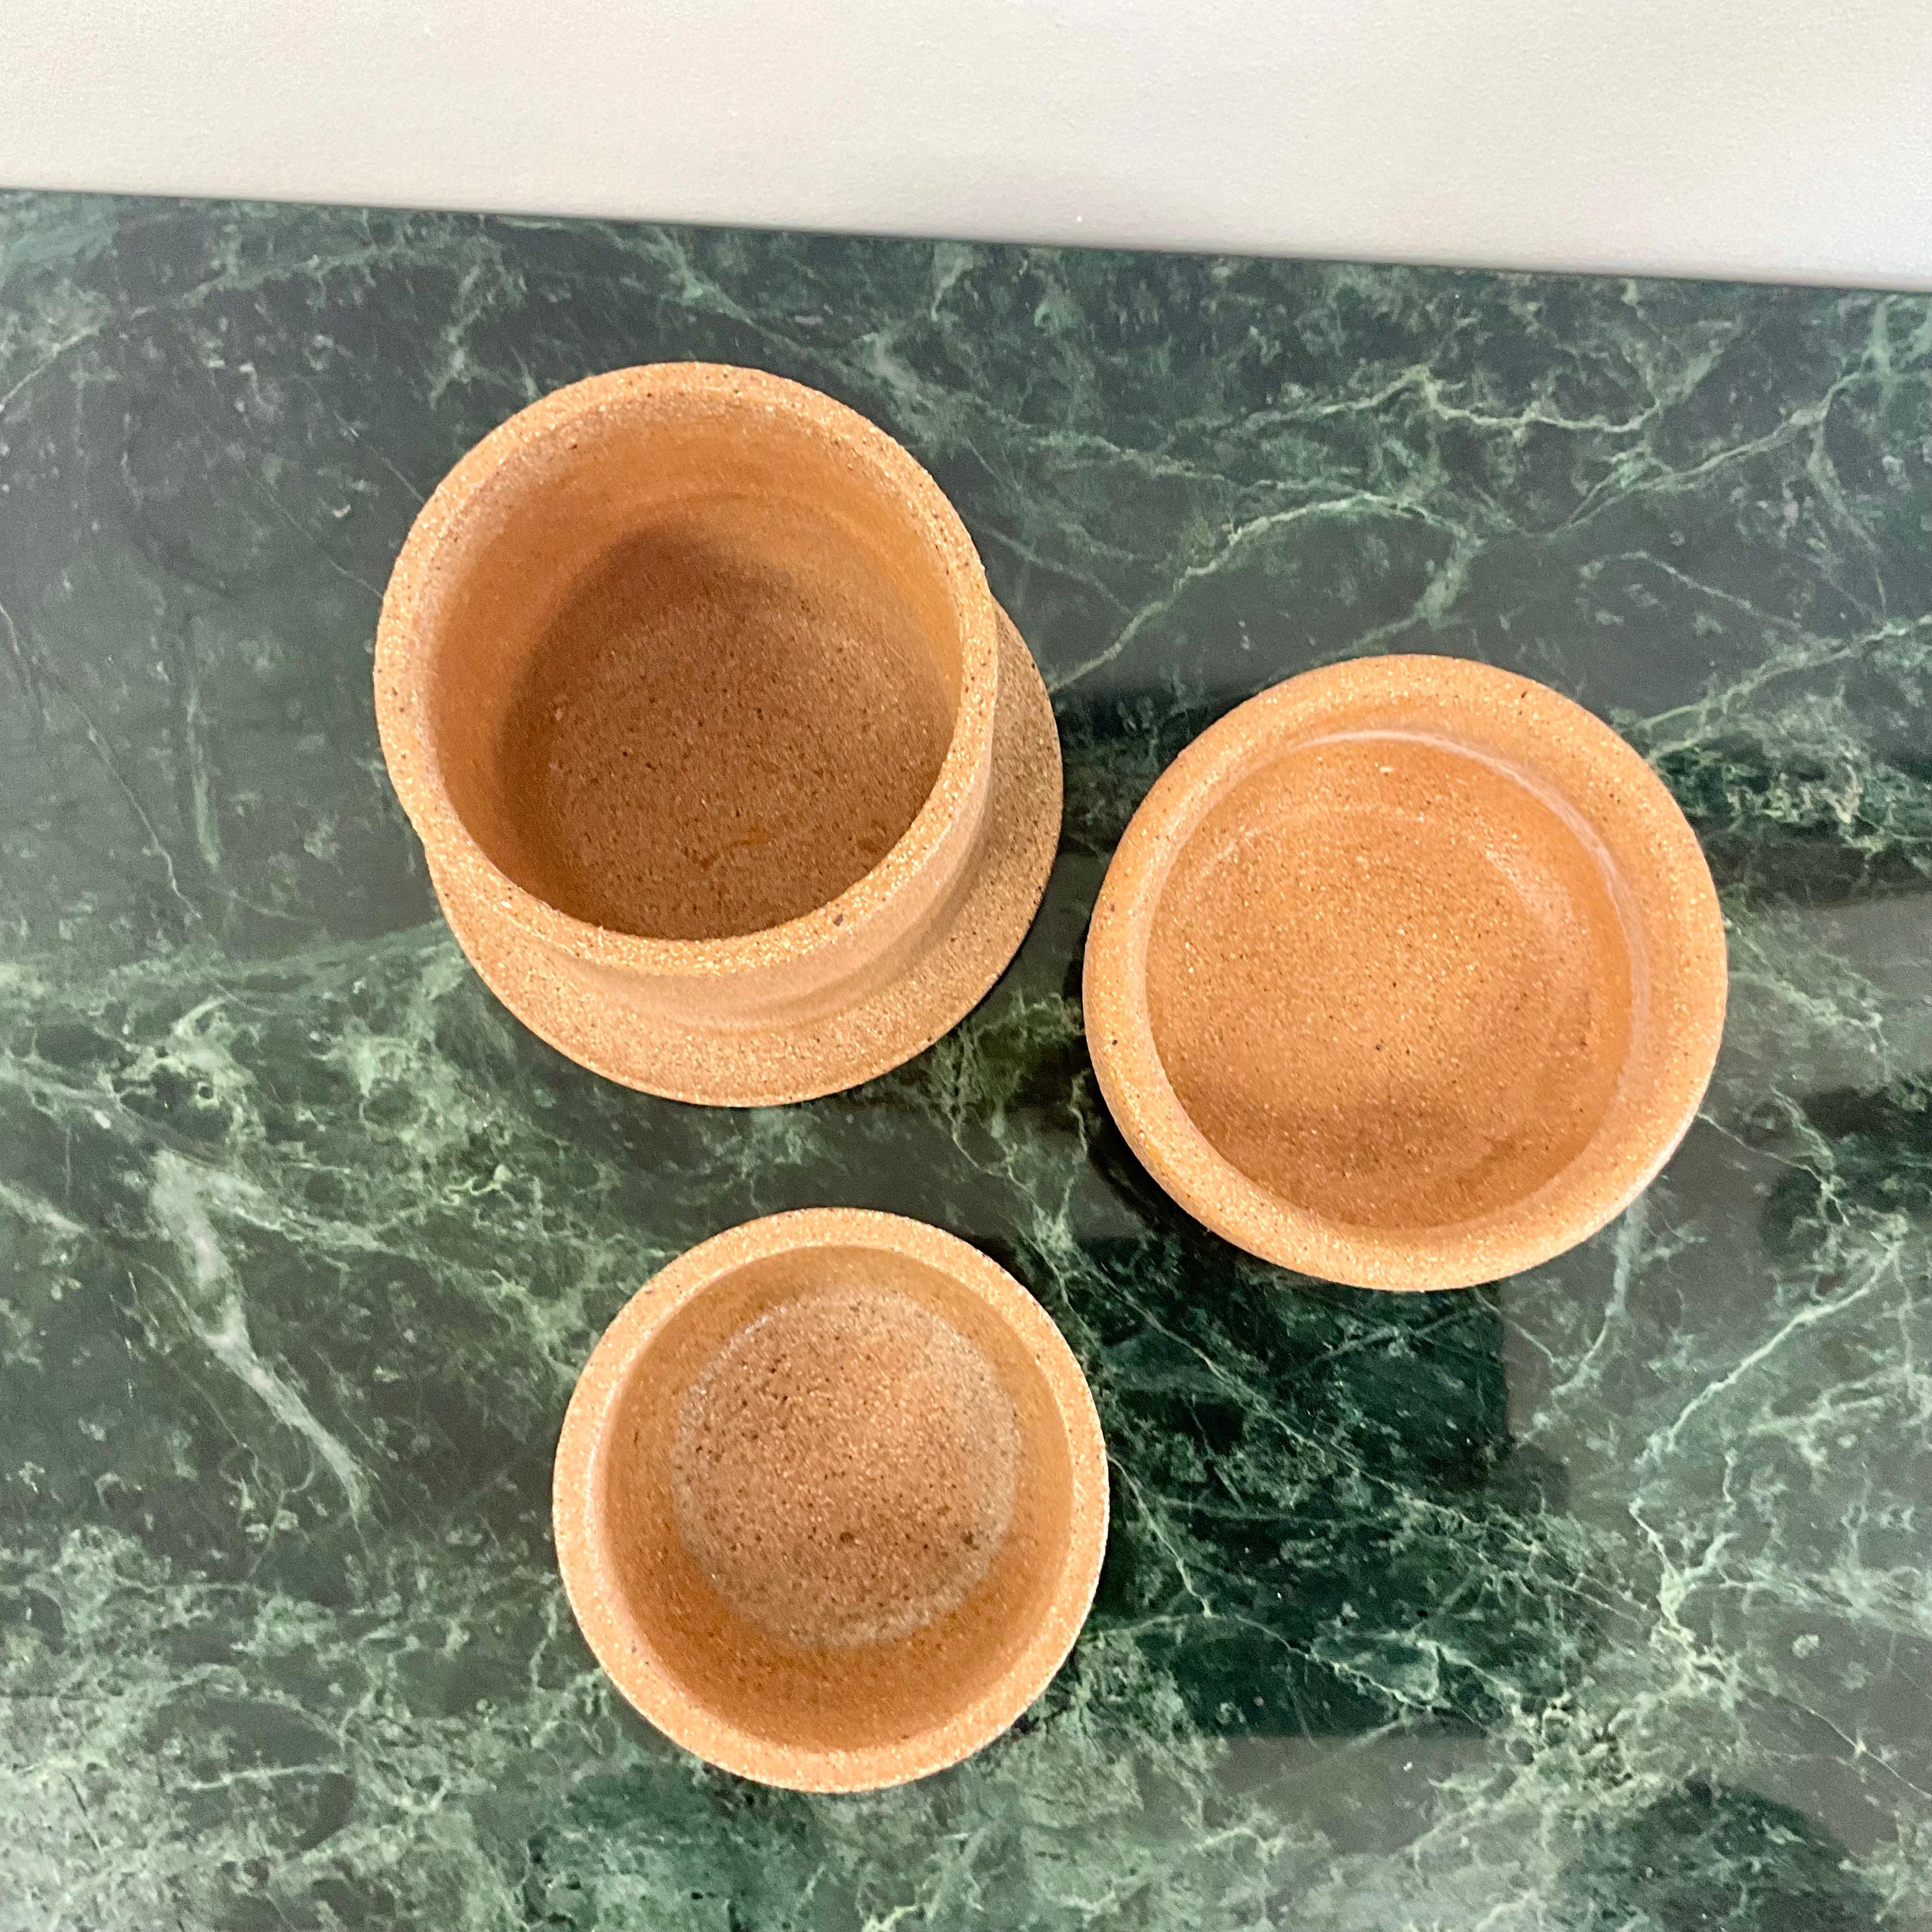 Set of three stoneware clay pottery pieces in graduating sizes by artist Ted Teeter.  All Signed on the underside Ted Teeter with one bing dated 1975 and another being dated 1978.  In ex Ellen’s condition with no chips or breaks.

Teeter, a teacher